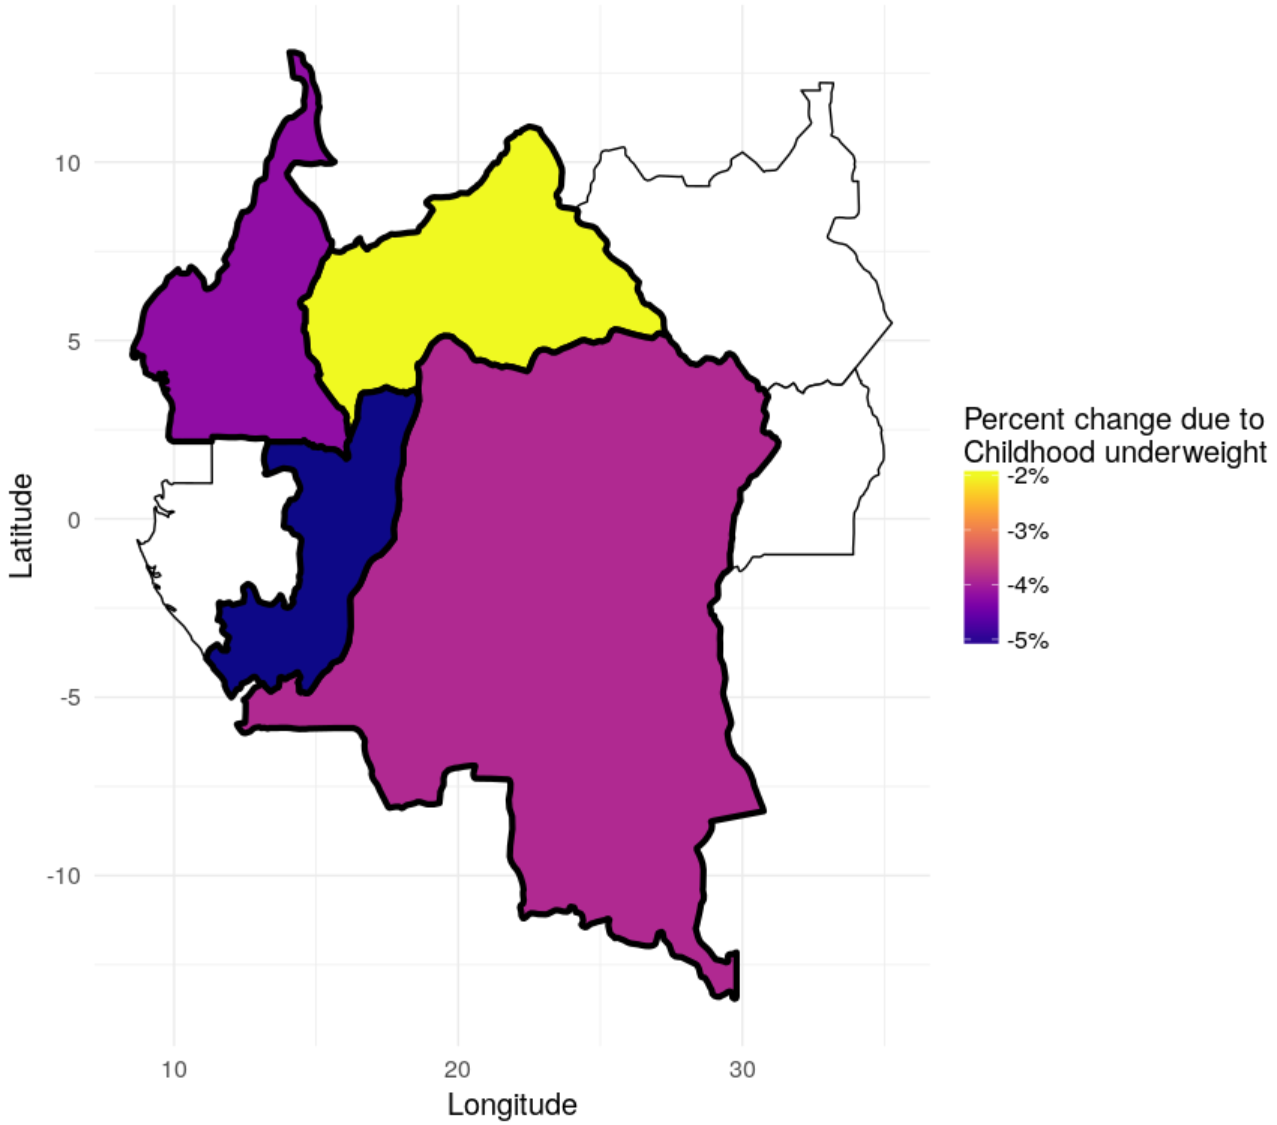 Map showing percent change in diarrhea mortality due to change in childhood underweight in 4 countries